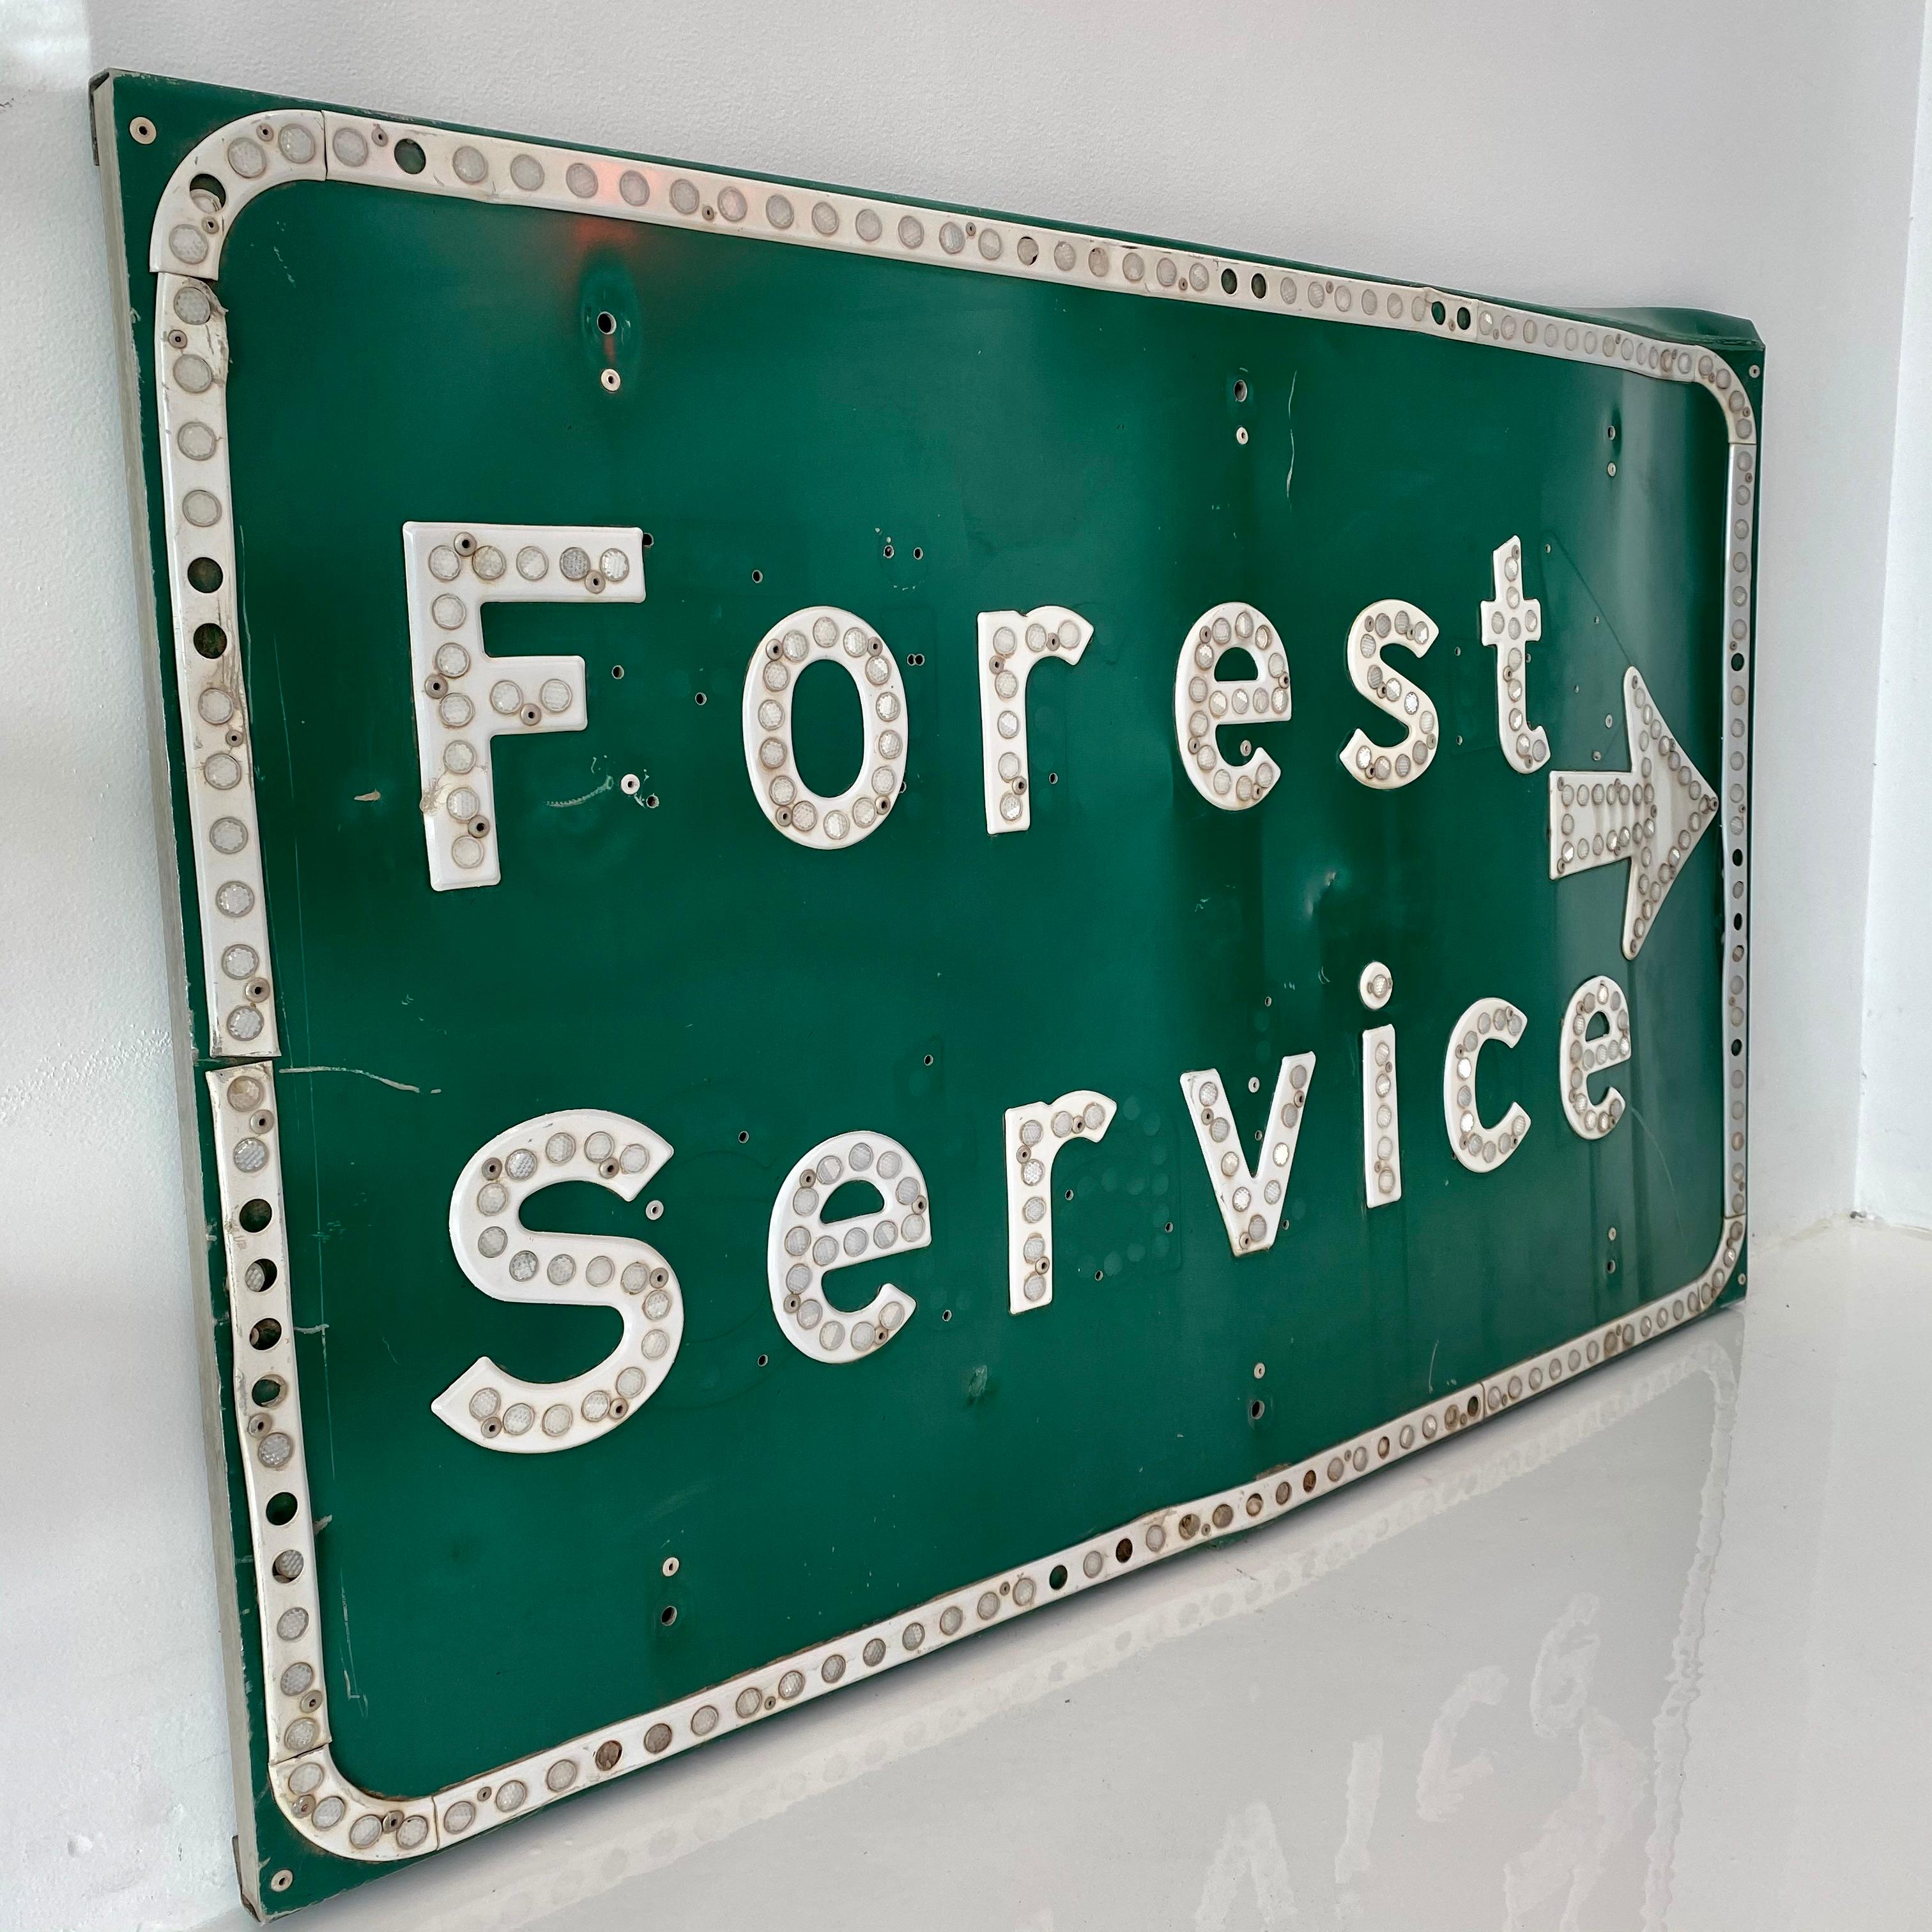 Vintage Forest Service sign. Made in California in 1974. 4 feet wide. Green steel sign with white lettering and cats eye reflectors. Stamped CA '74 on the back. Good vintage condition. Some bends and wear to metal.